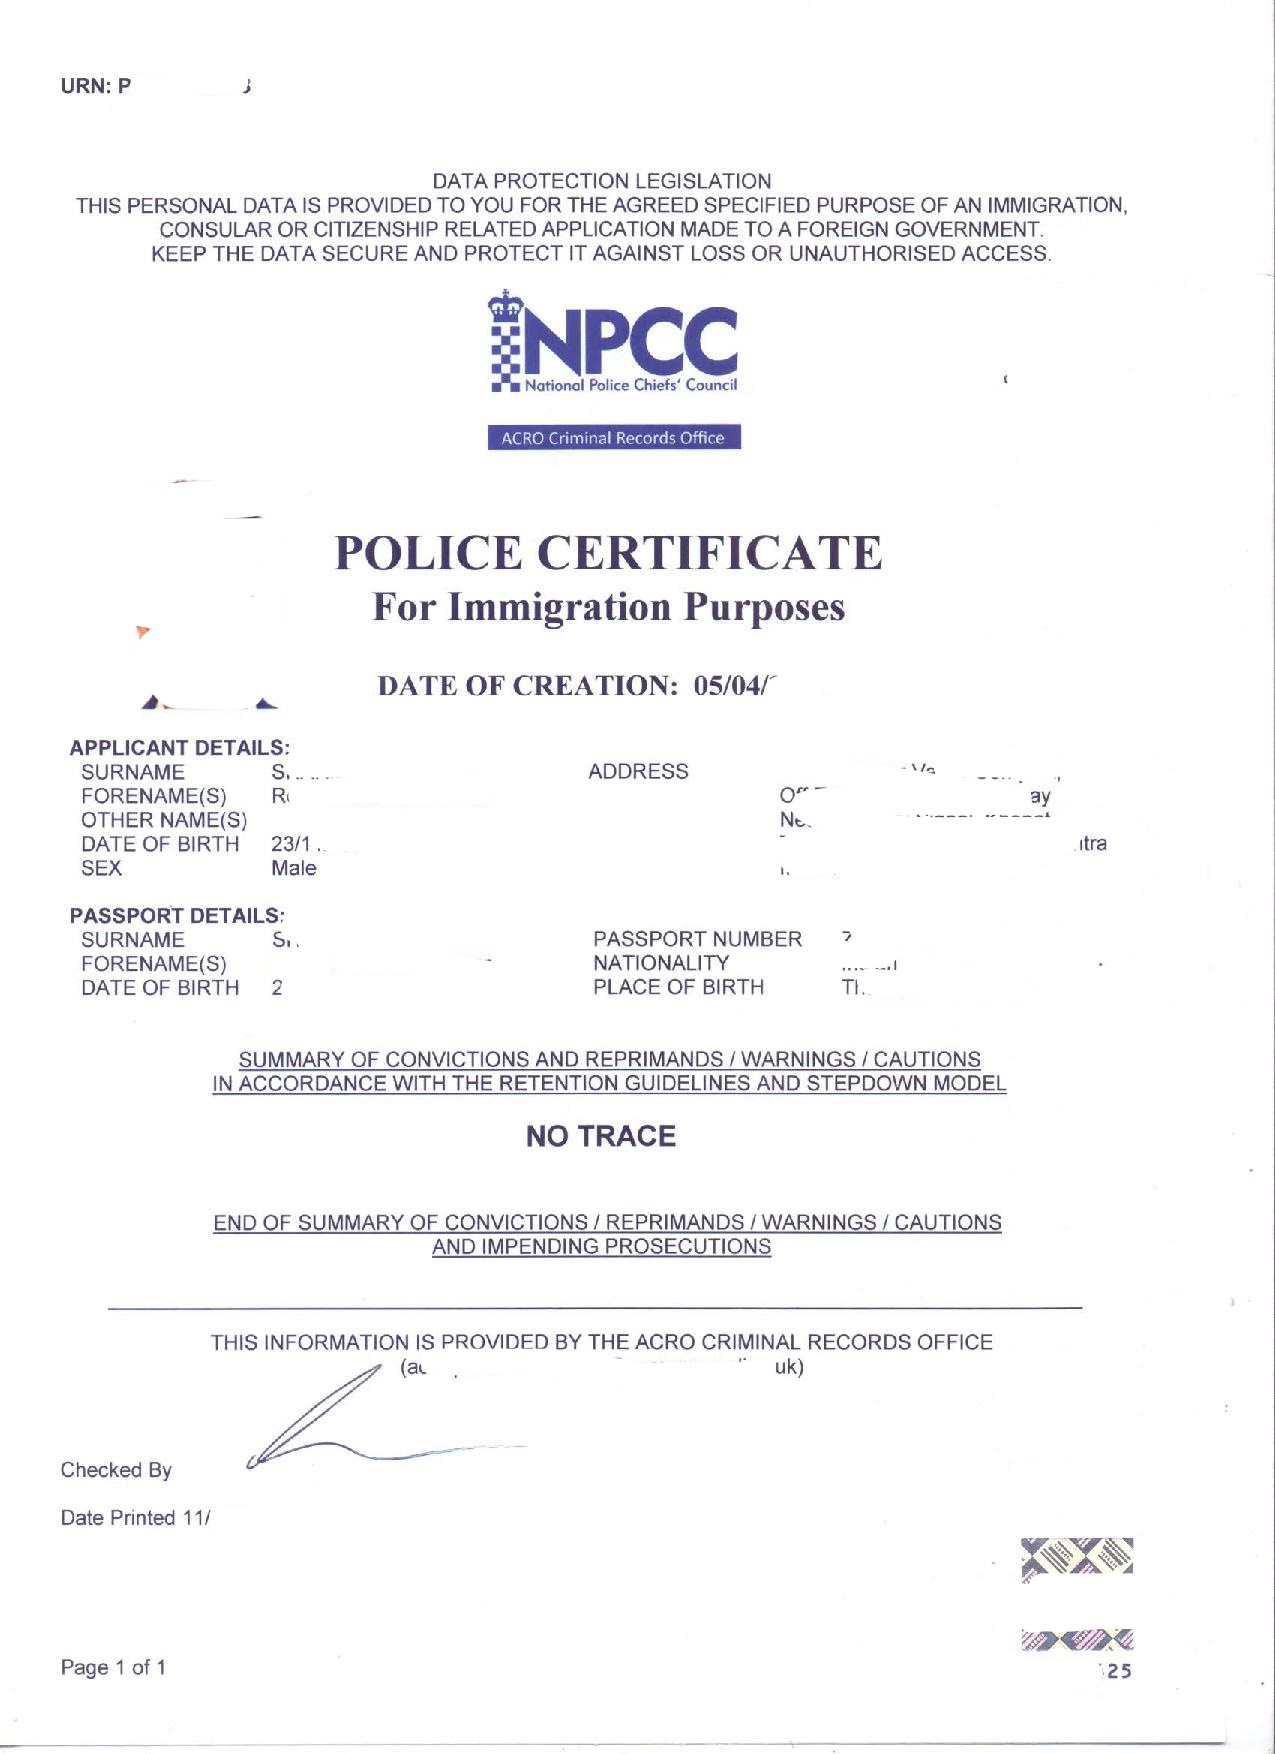 Police Clearance Certificate PCC United Kingdom in India